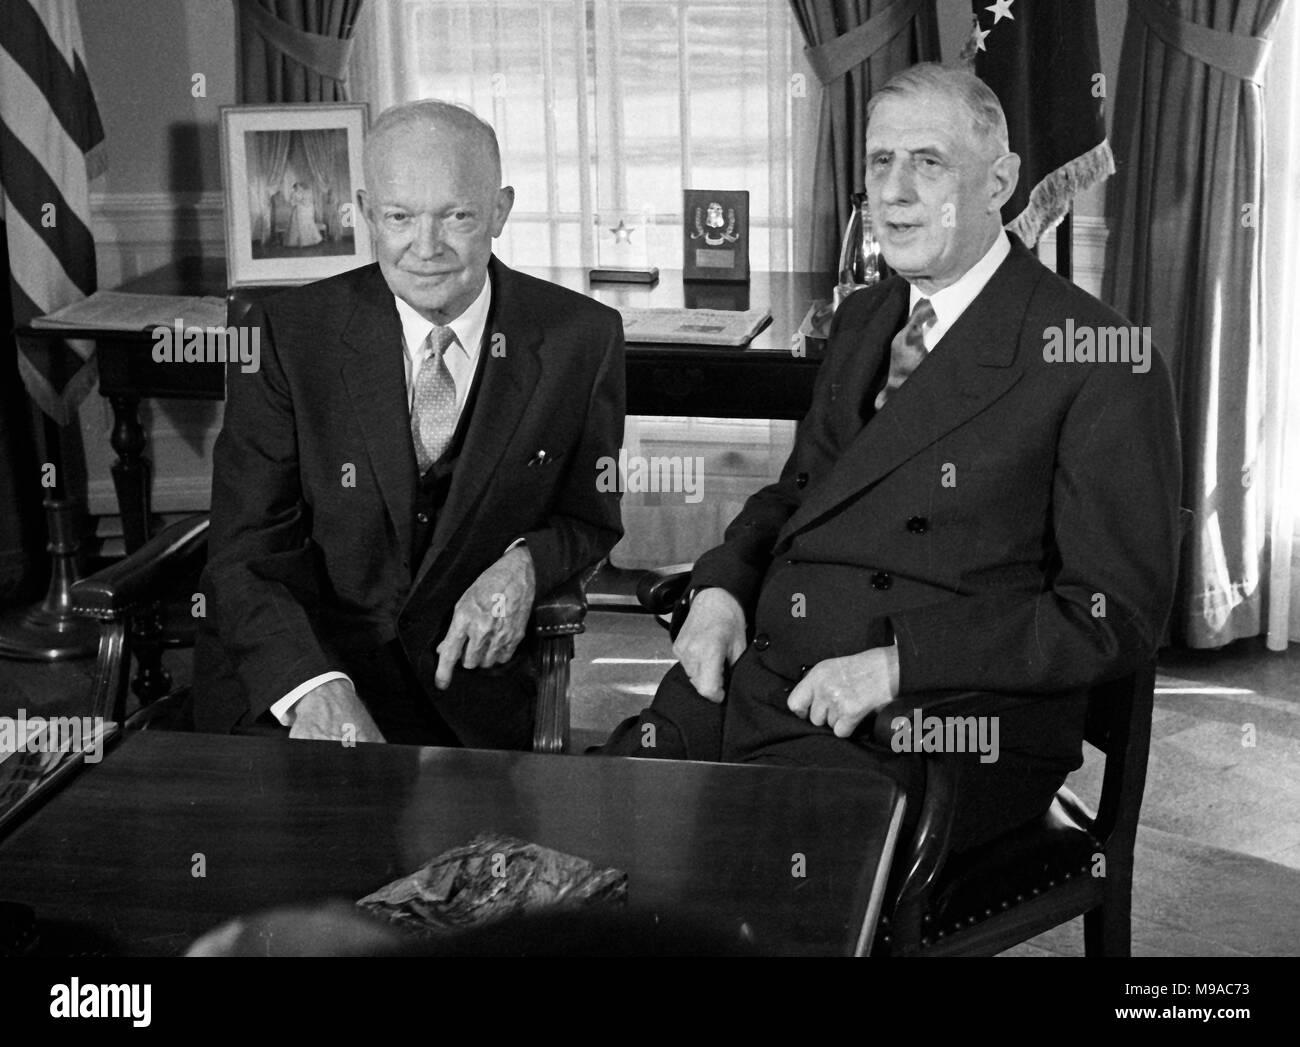 FILED - United States President Dwight D. Eisenhower, left, meets President Charles de Gaulle of France in the Oval Office of the White House in Washington, DC on April 25, 1960. Credit: Benjamin E. 'Gene' Forte/CNP - NO WIRE SERVICE · Photo: Benjamin E. 'gene' Forte/Consolidated News Photos/Benjamin E. 'Gene' Forte - CNP Stock Photo